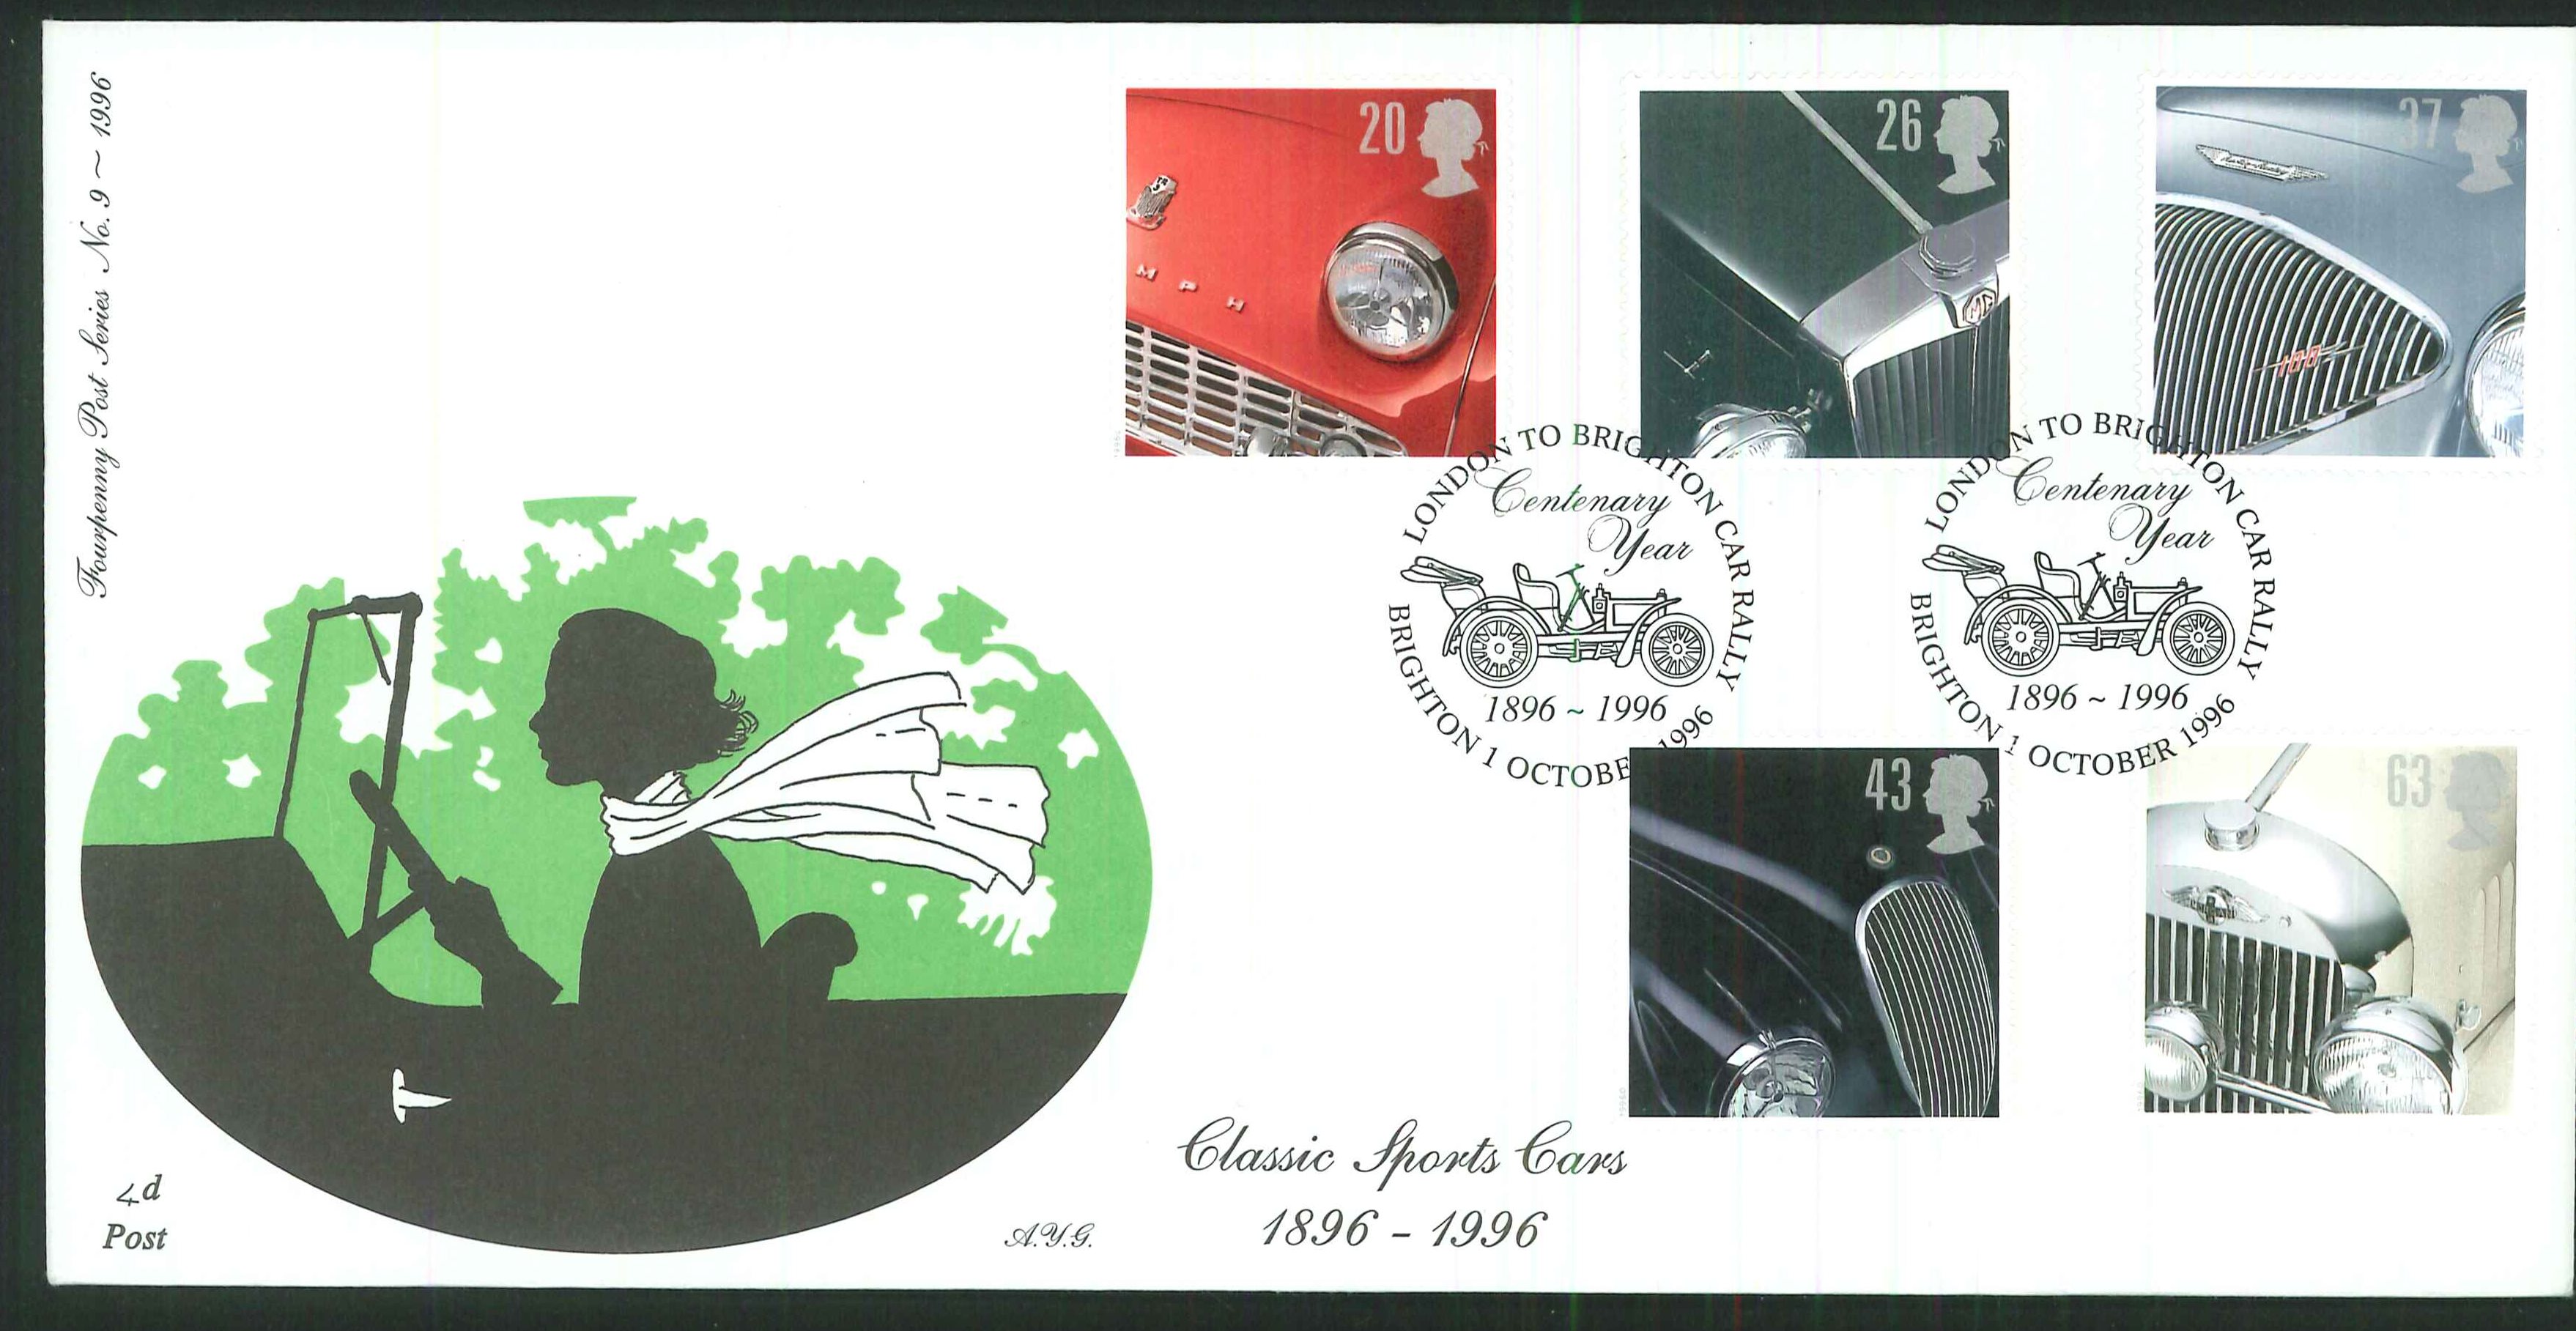 1996 - Classic Sports Cars 1896 - 1996, First Day Cover - Brighton Postmark